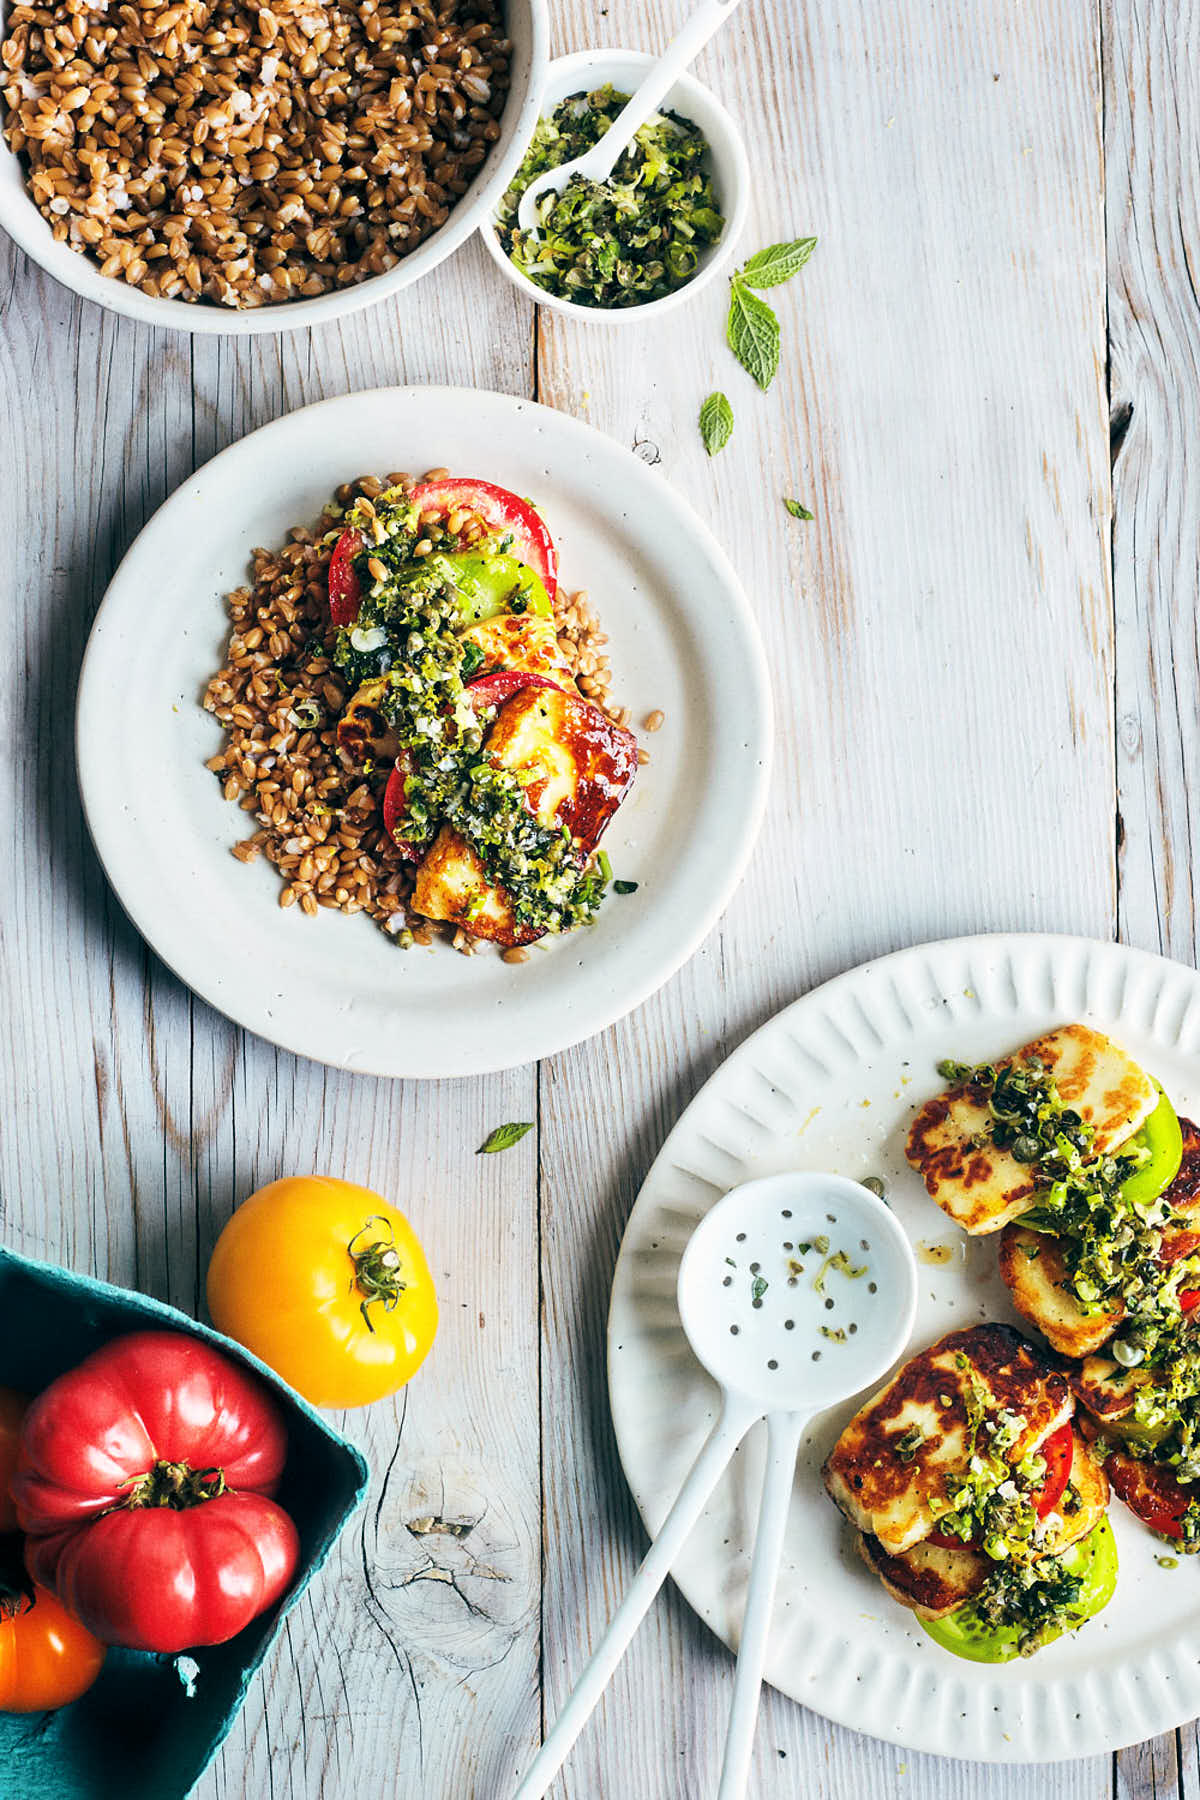 Seared halloumi served onto a plate with farro and topped with fresh herbs